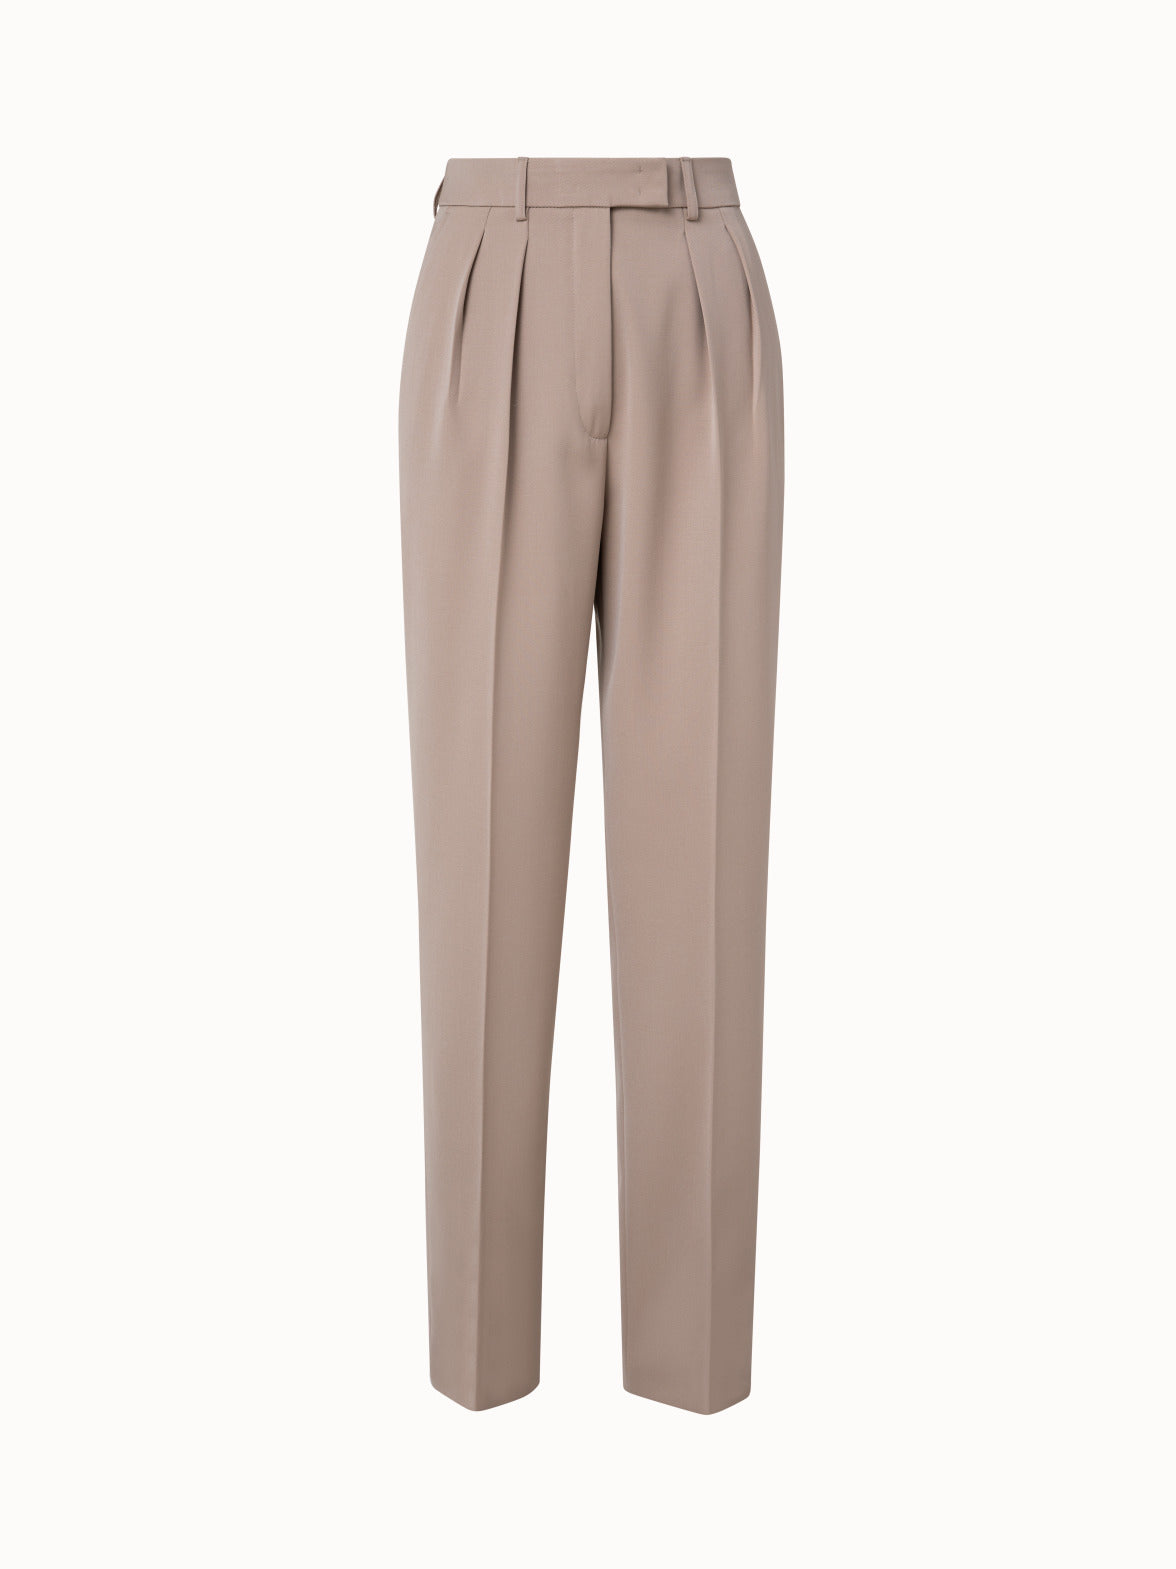 Wool gabardine trouser with front pleats in snow white — Ryan Roche Store